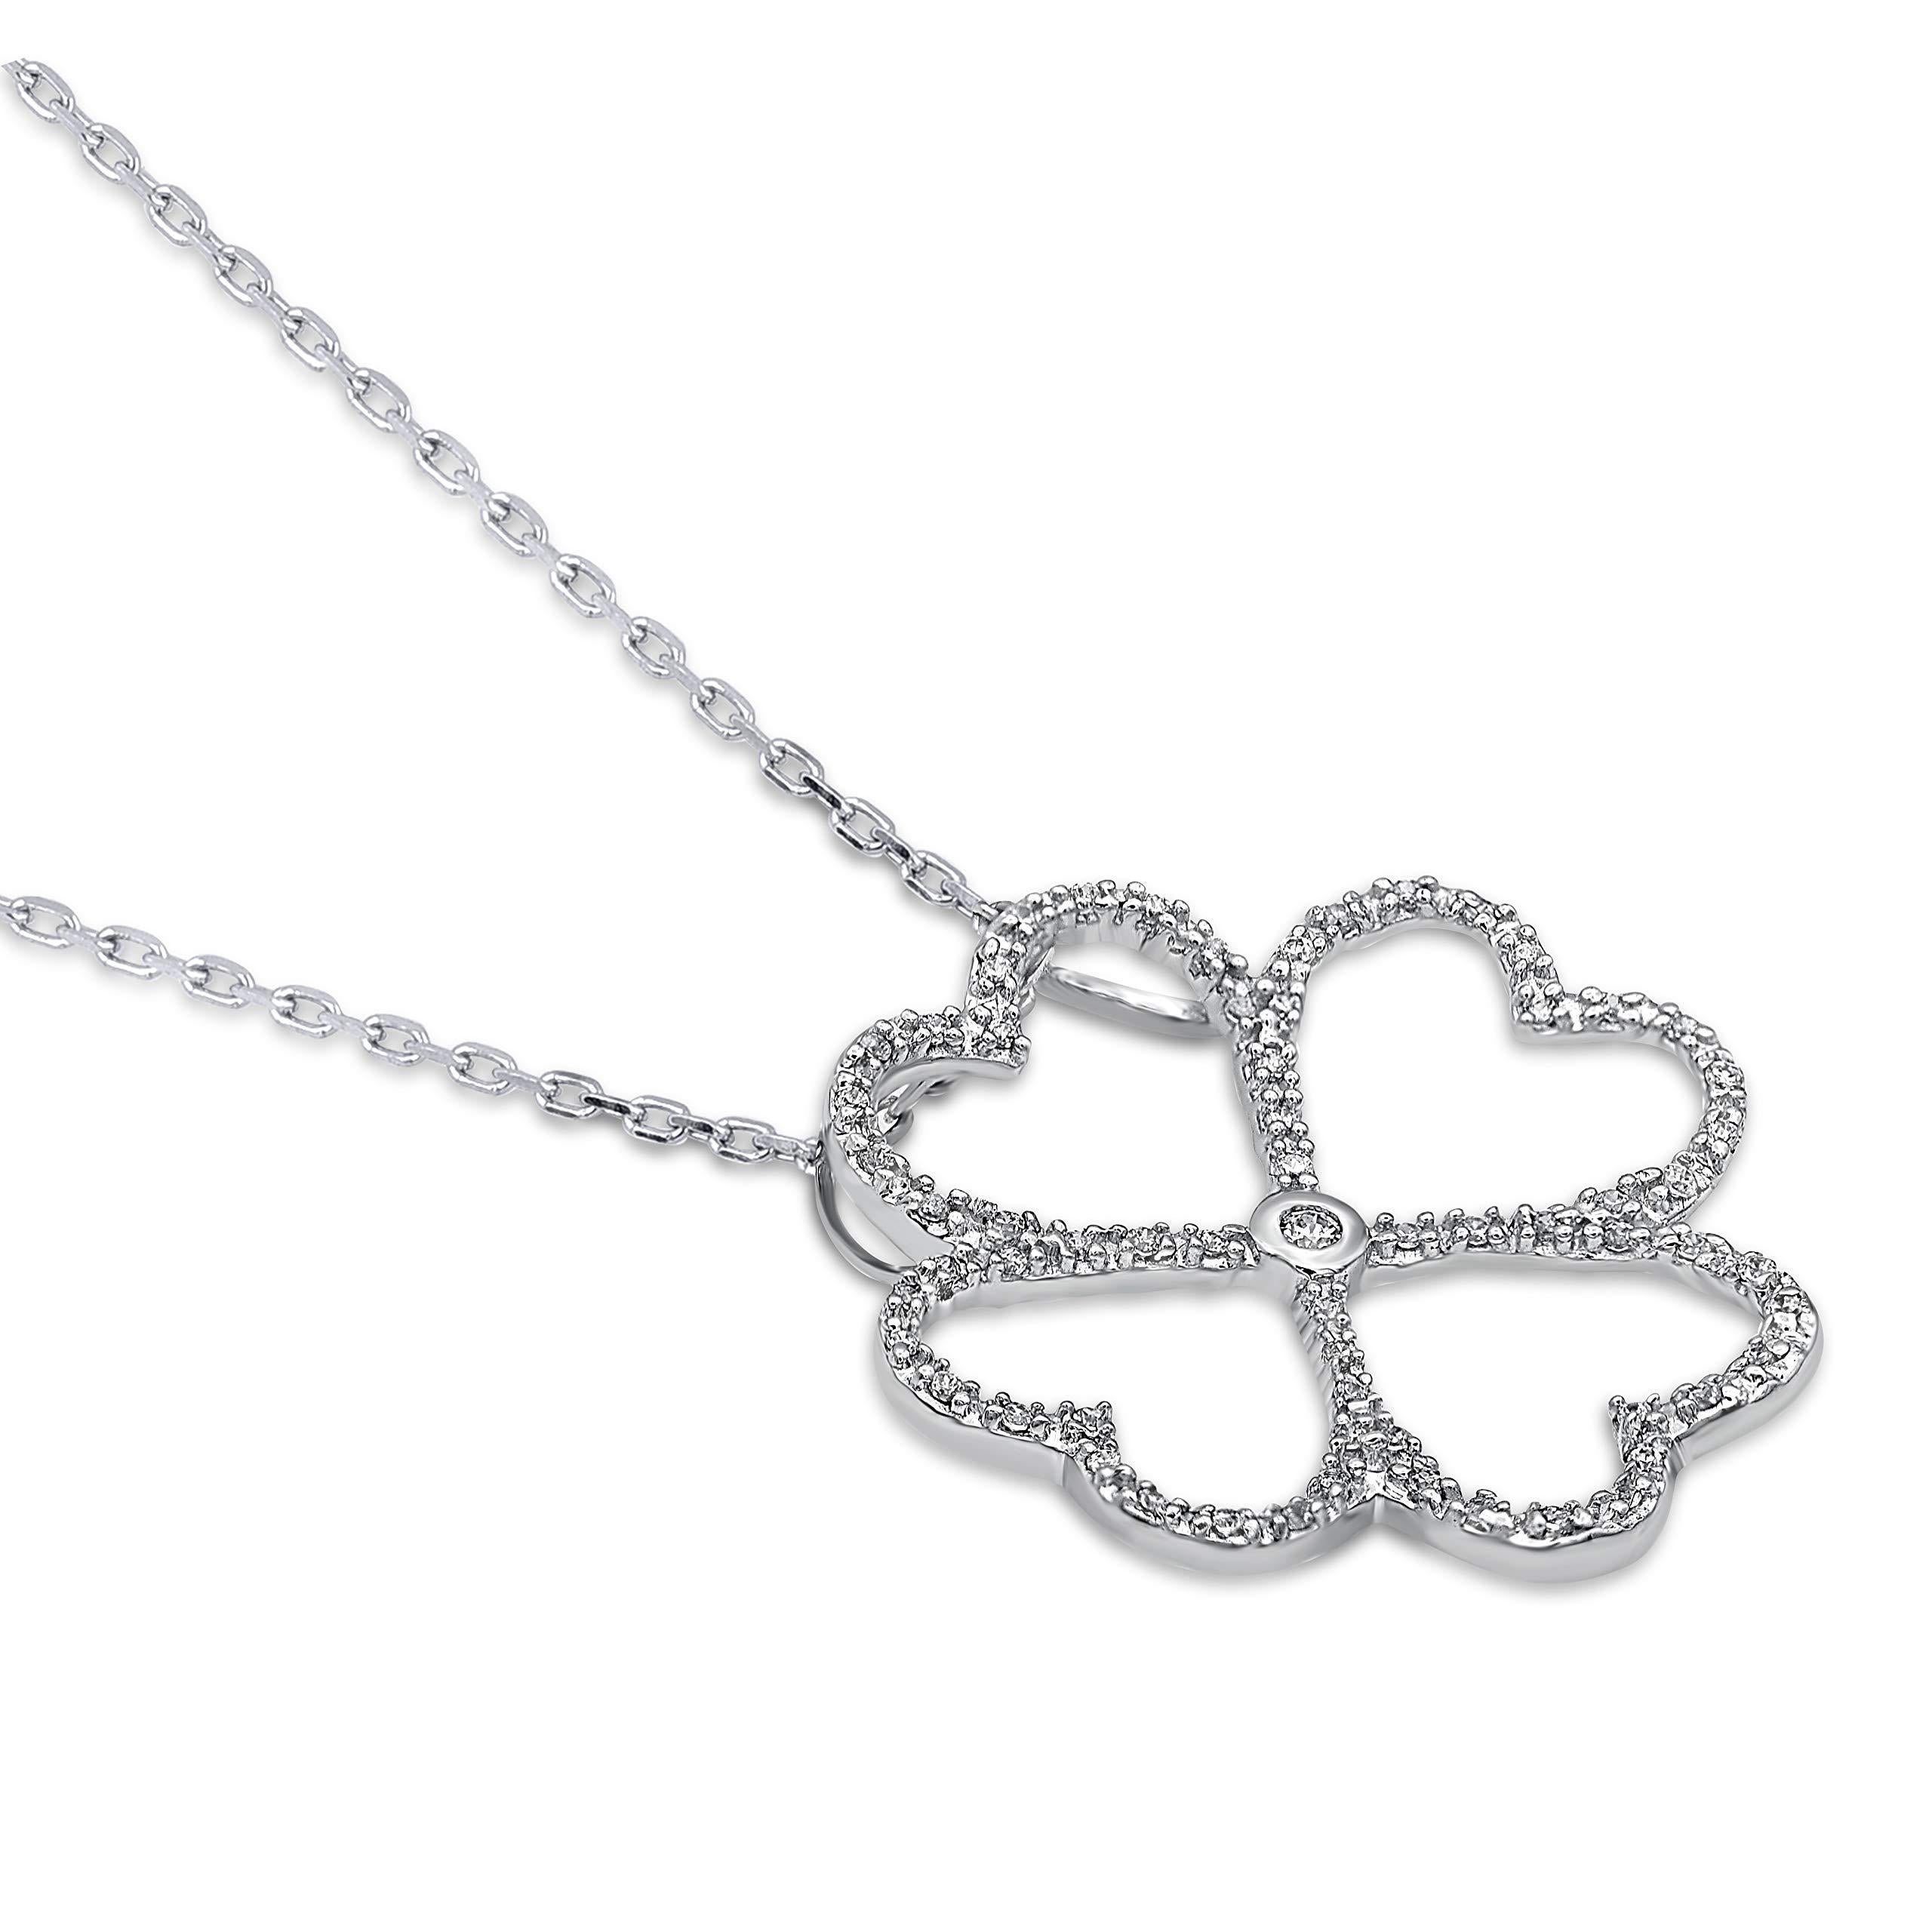 No luck is needed when you choose this pretty diamond clover pendant. The pendant is crafted from 14 karat white gold and features 65 round single cut and brilliant cut diamond set in pave & bezel setting and a high polish finish complete the